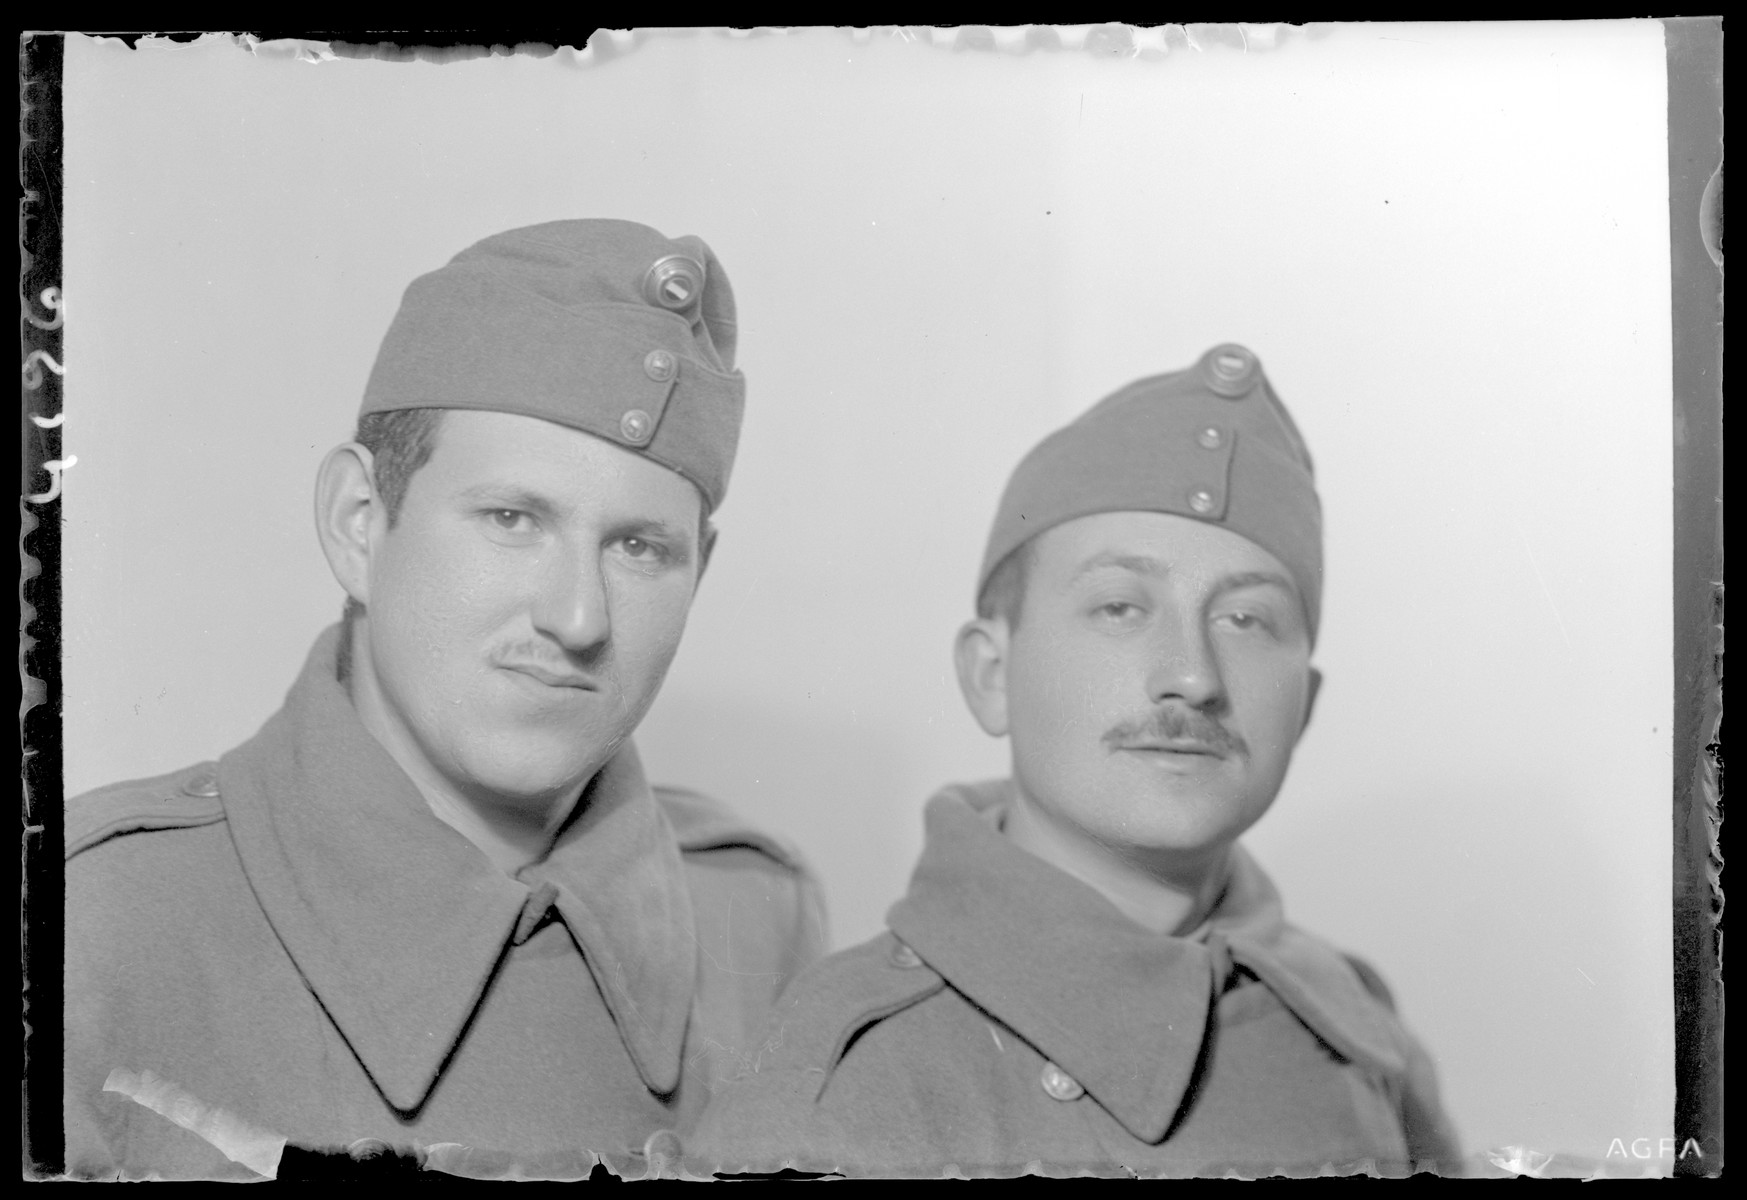 Studio portrait of Bela Fischer in a military uniform with another soldier.